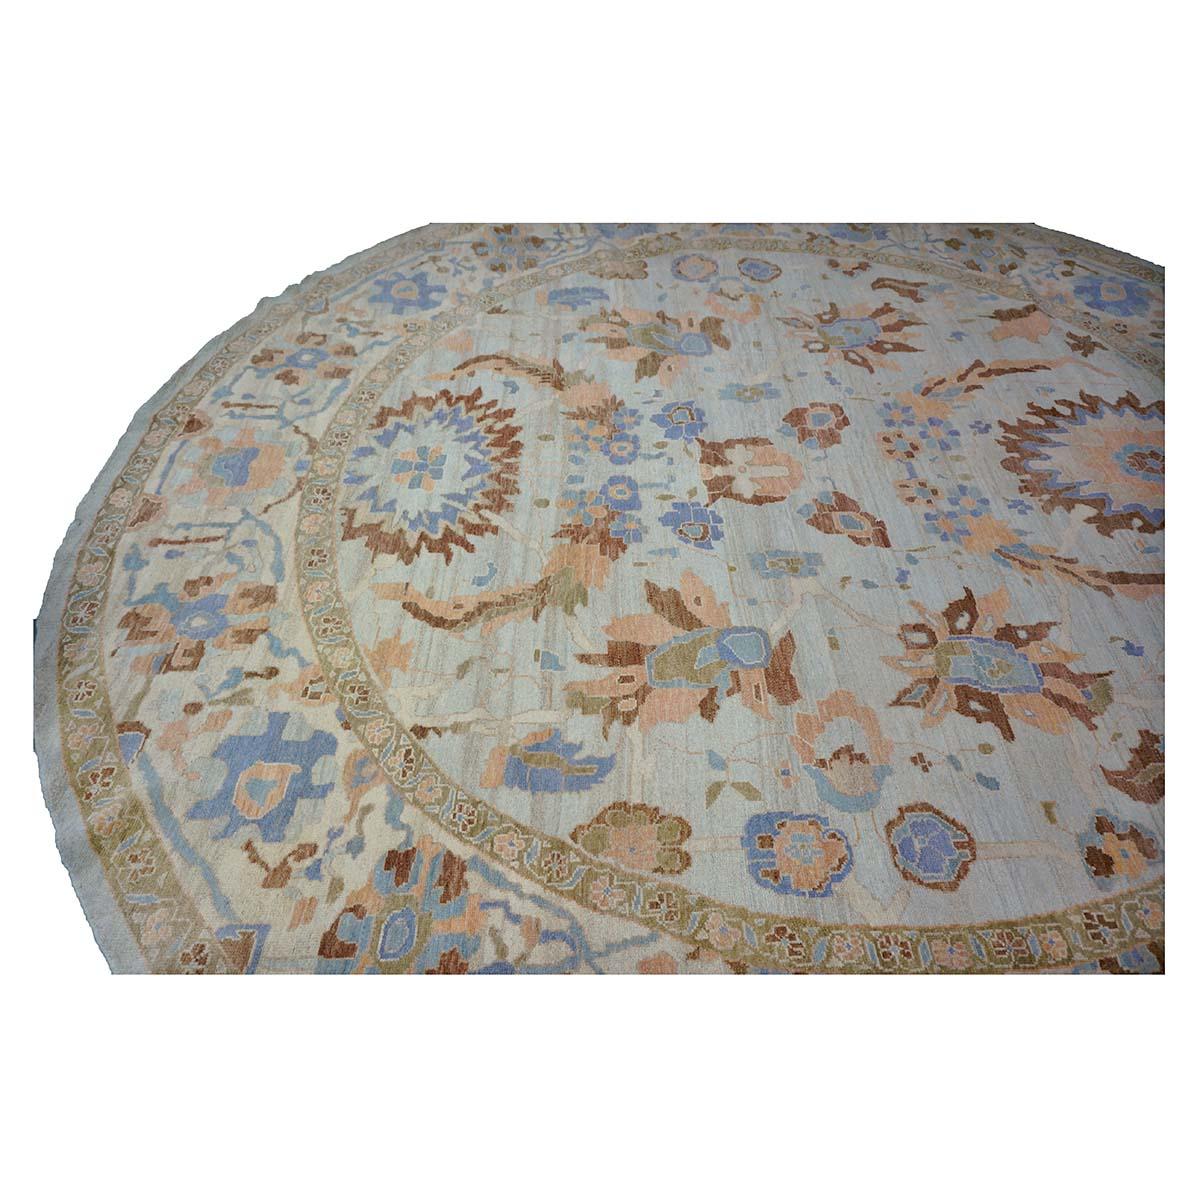 Sultanabad Master 11x11 Light Blue & Light Orange Round Handmade Area Rug In Excellent Condition For Sale In Houston, TX